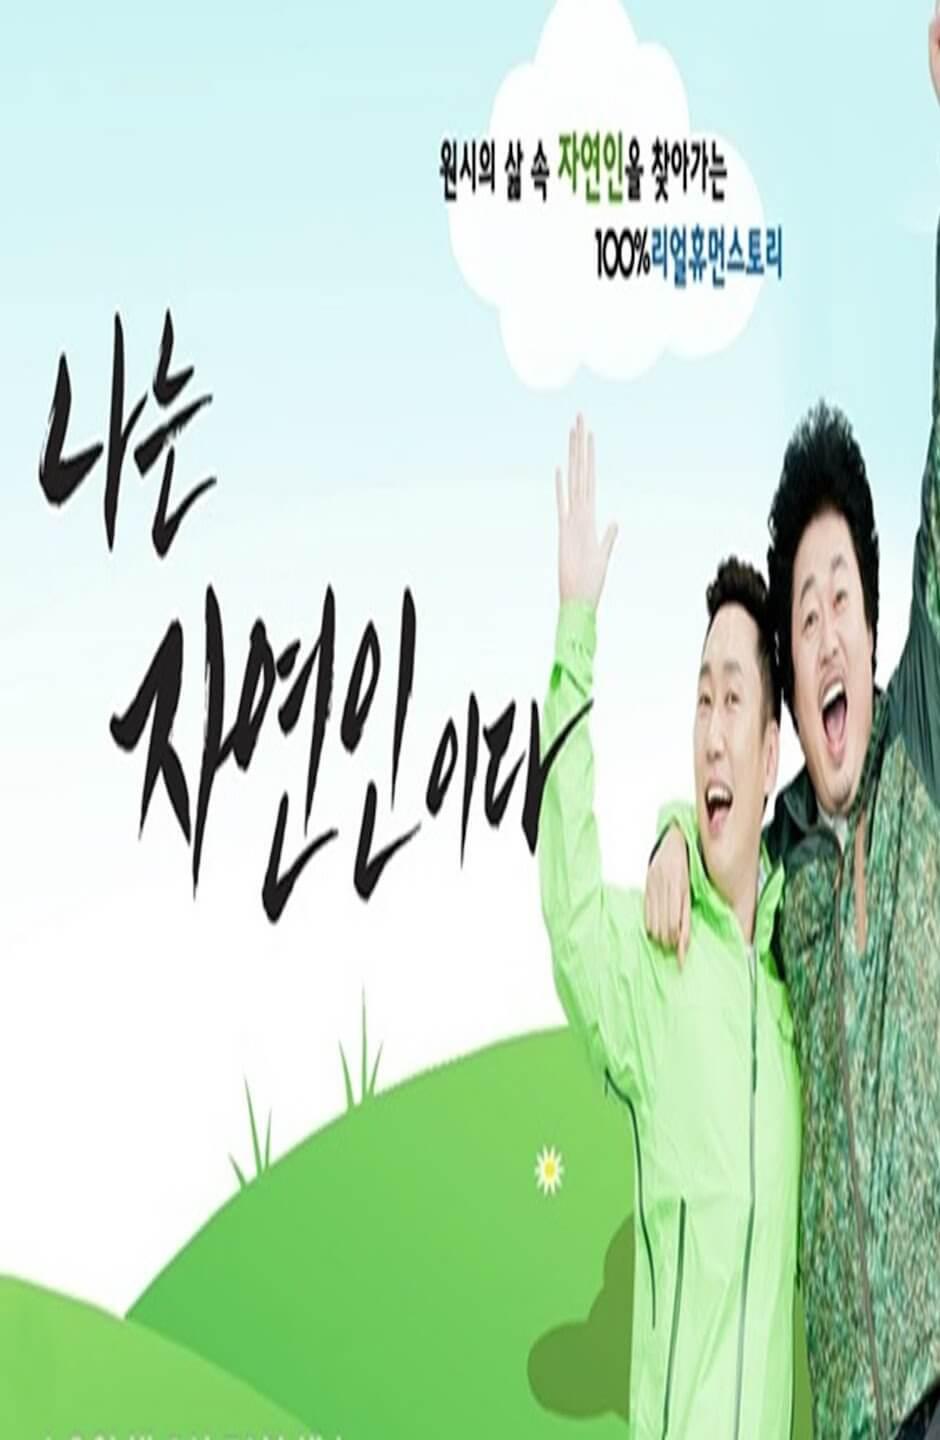 TV ratings for I Am A Natural Person (나는 자연인이다) in Sweden. MBN TV series